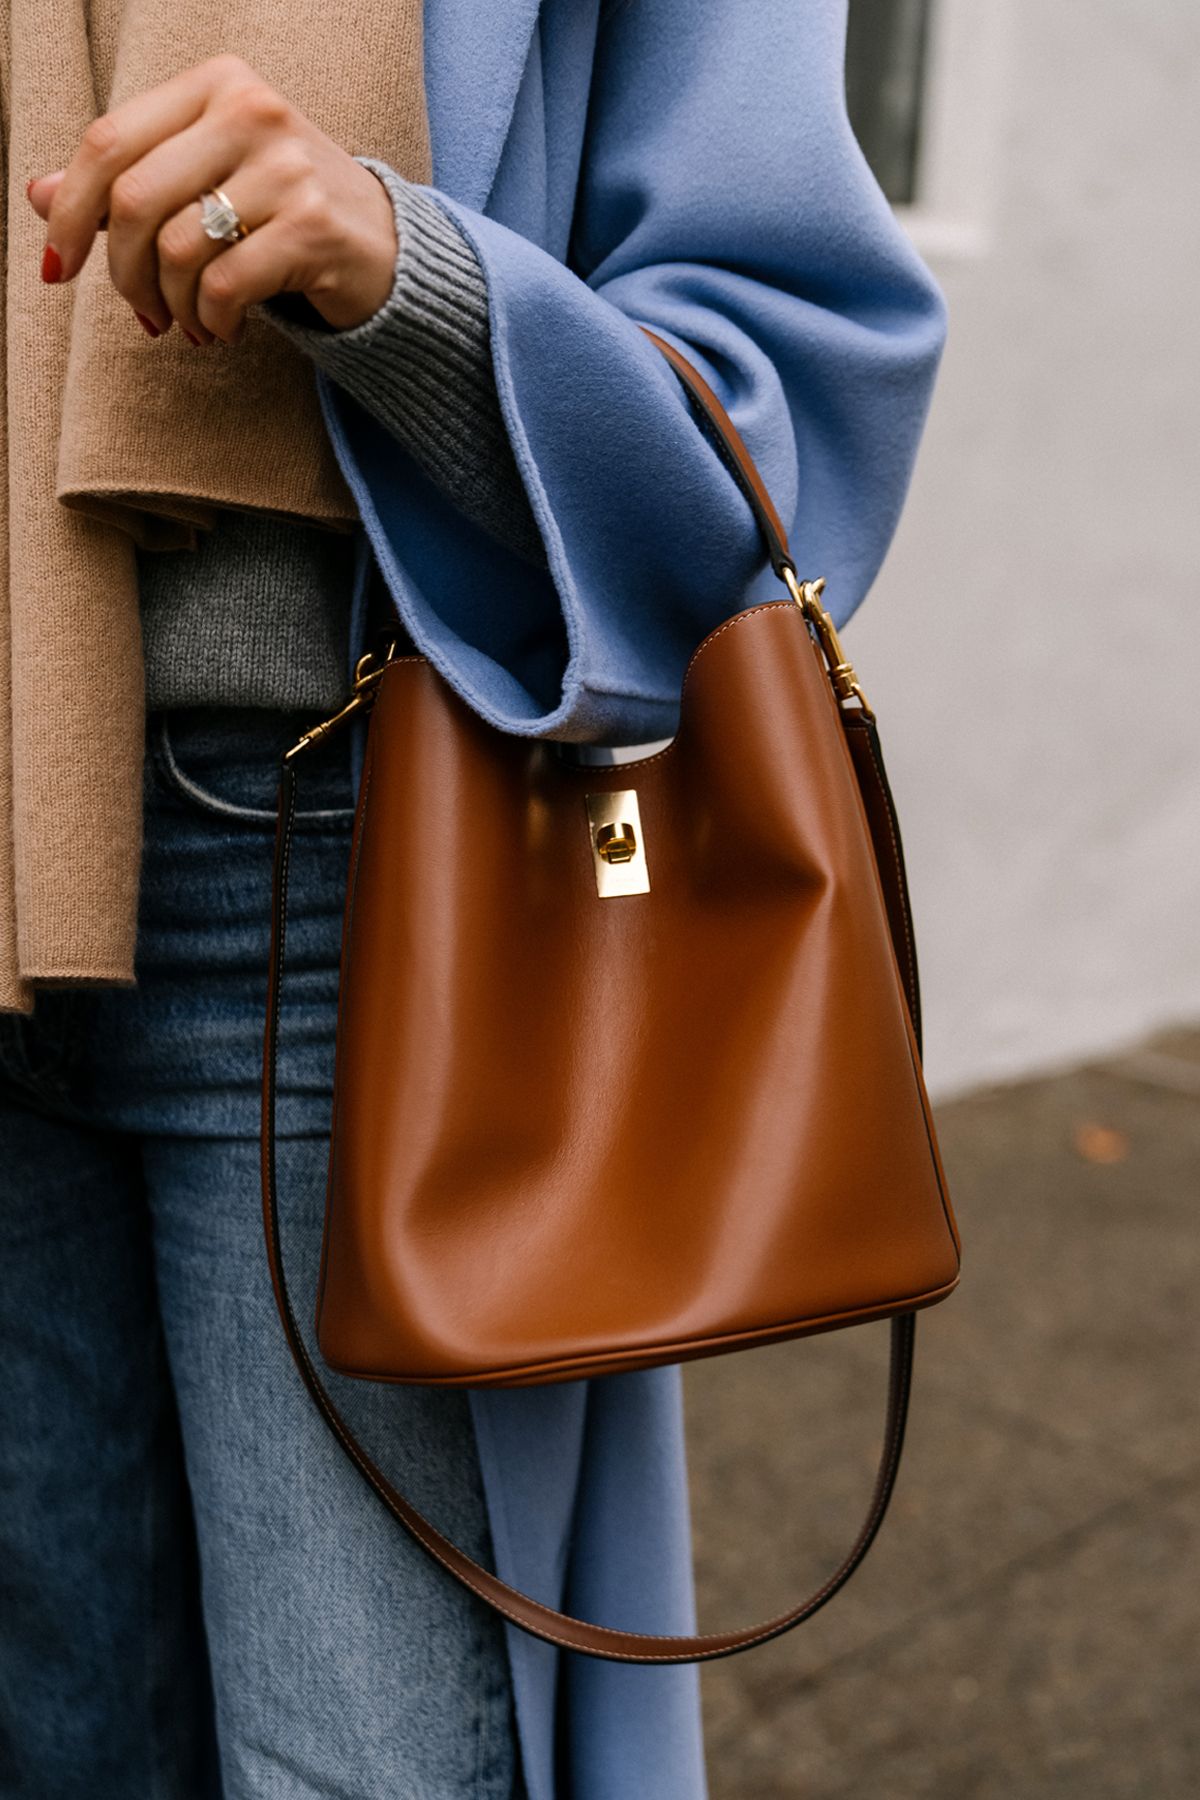 Luxurious Style: Celine Bags for Every Occasion